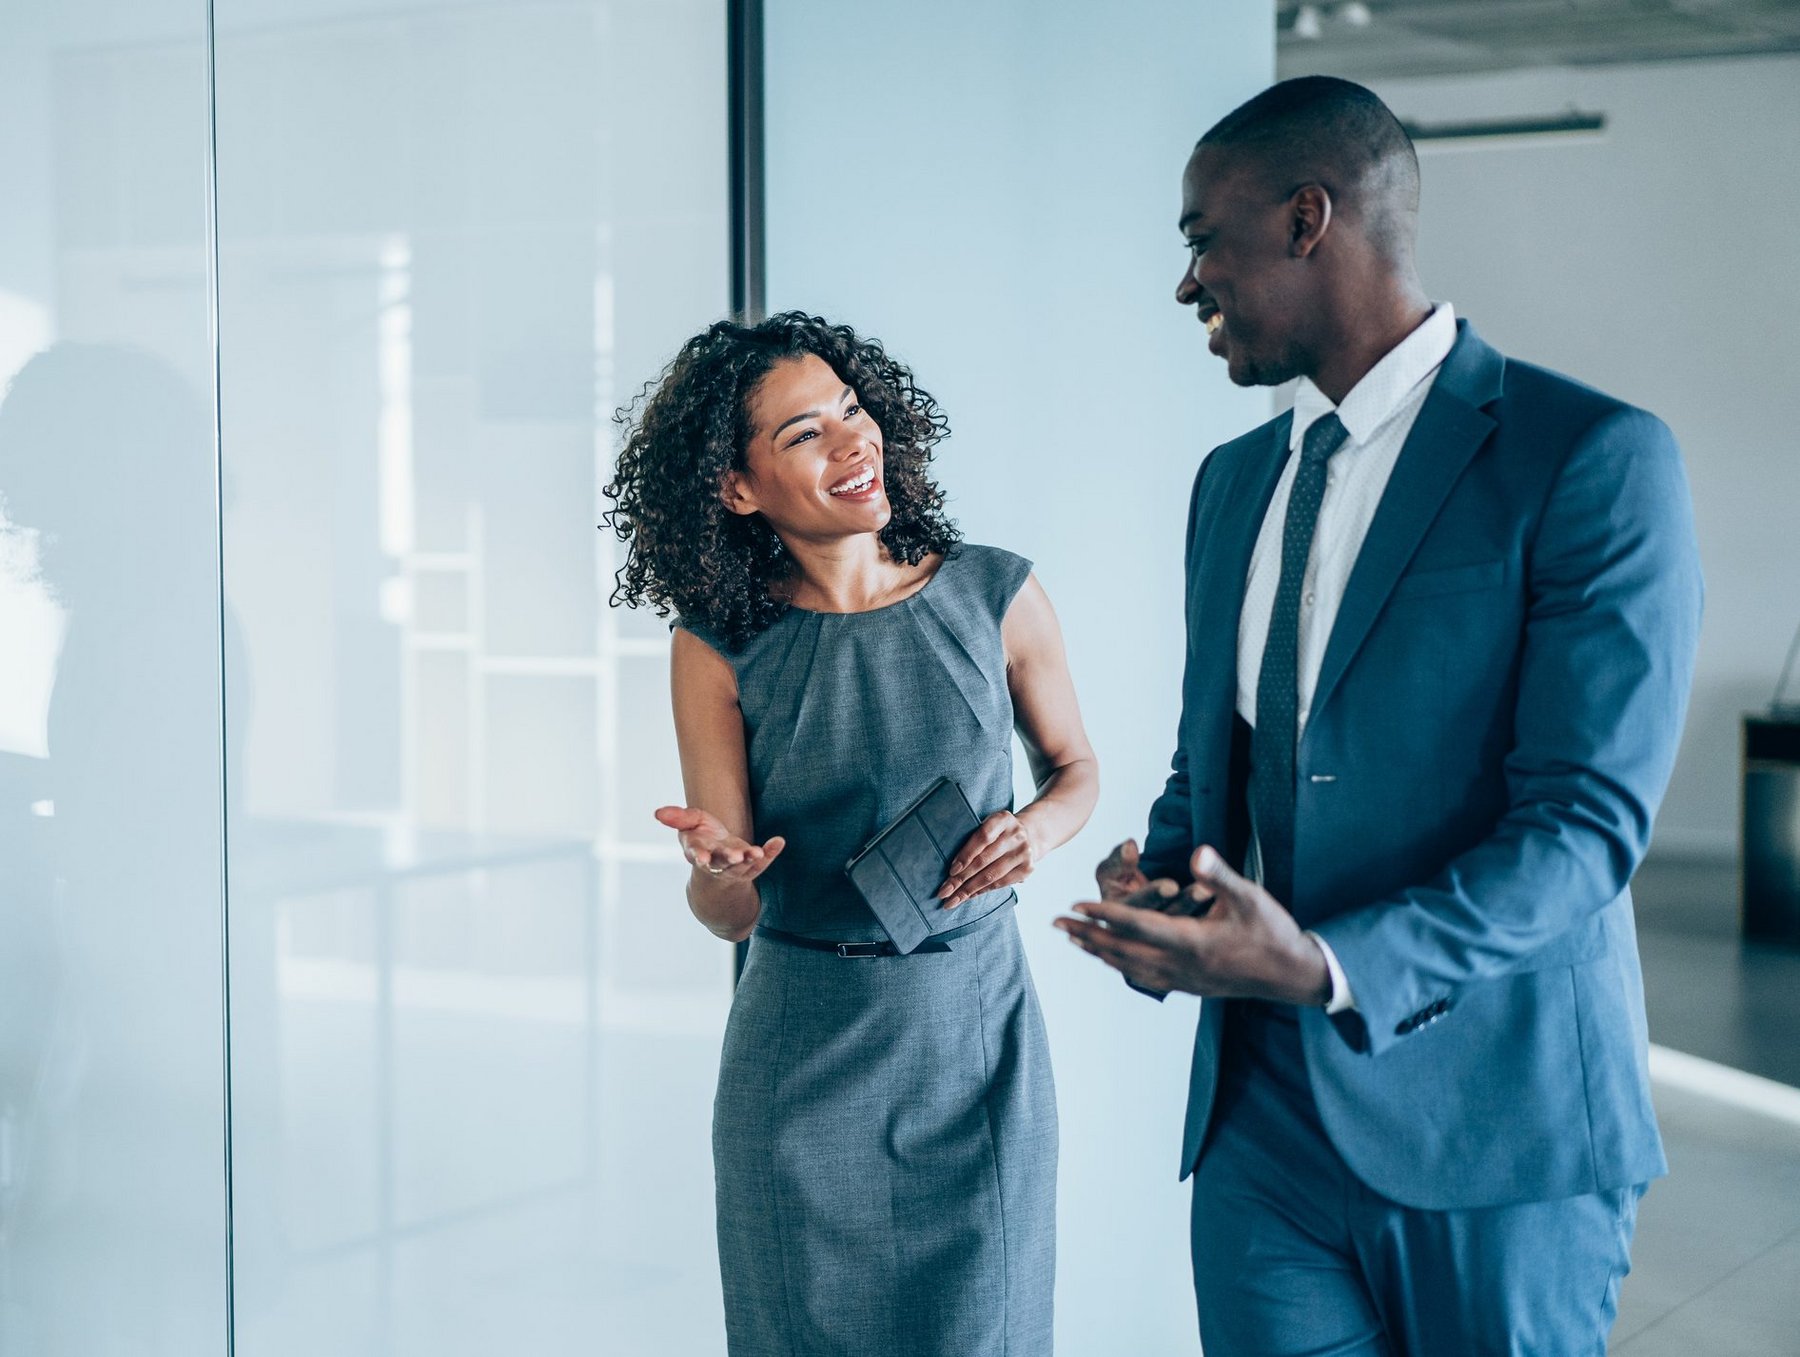 20 essential leadership resources for Black executives